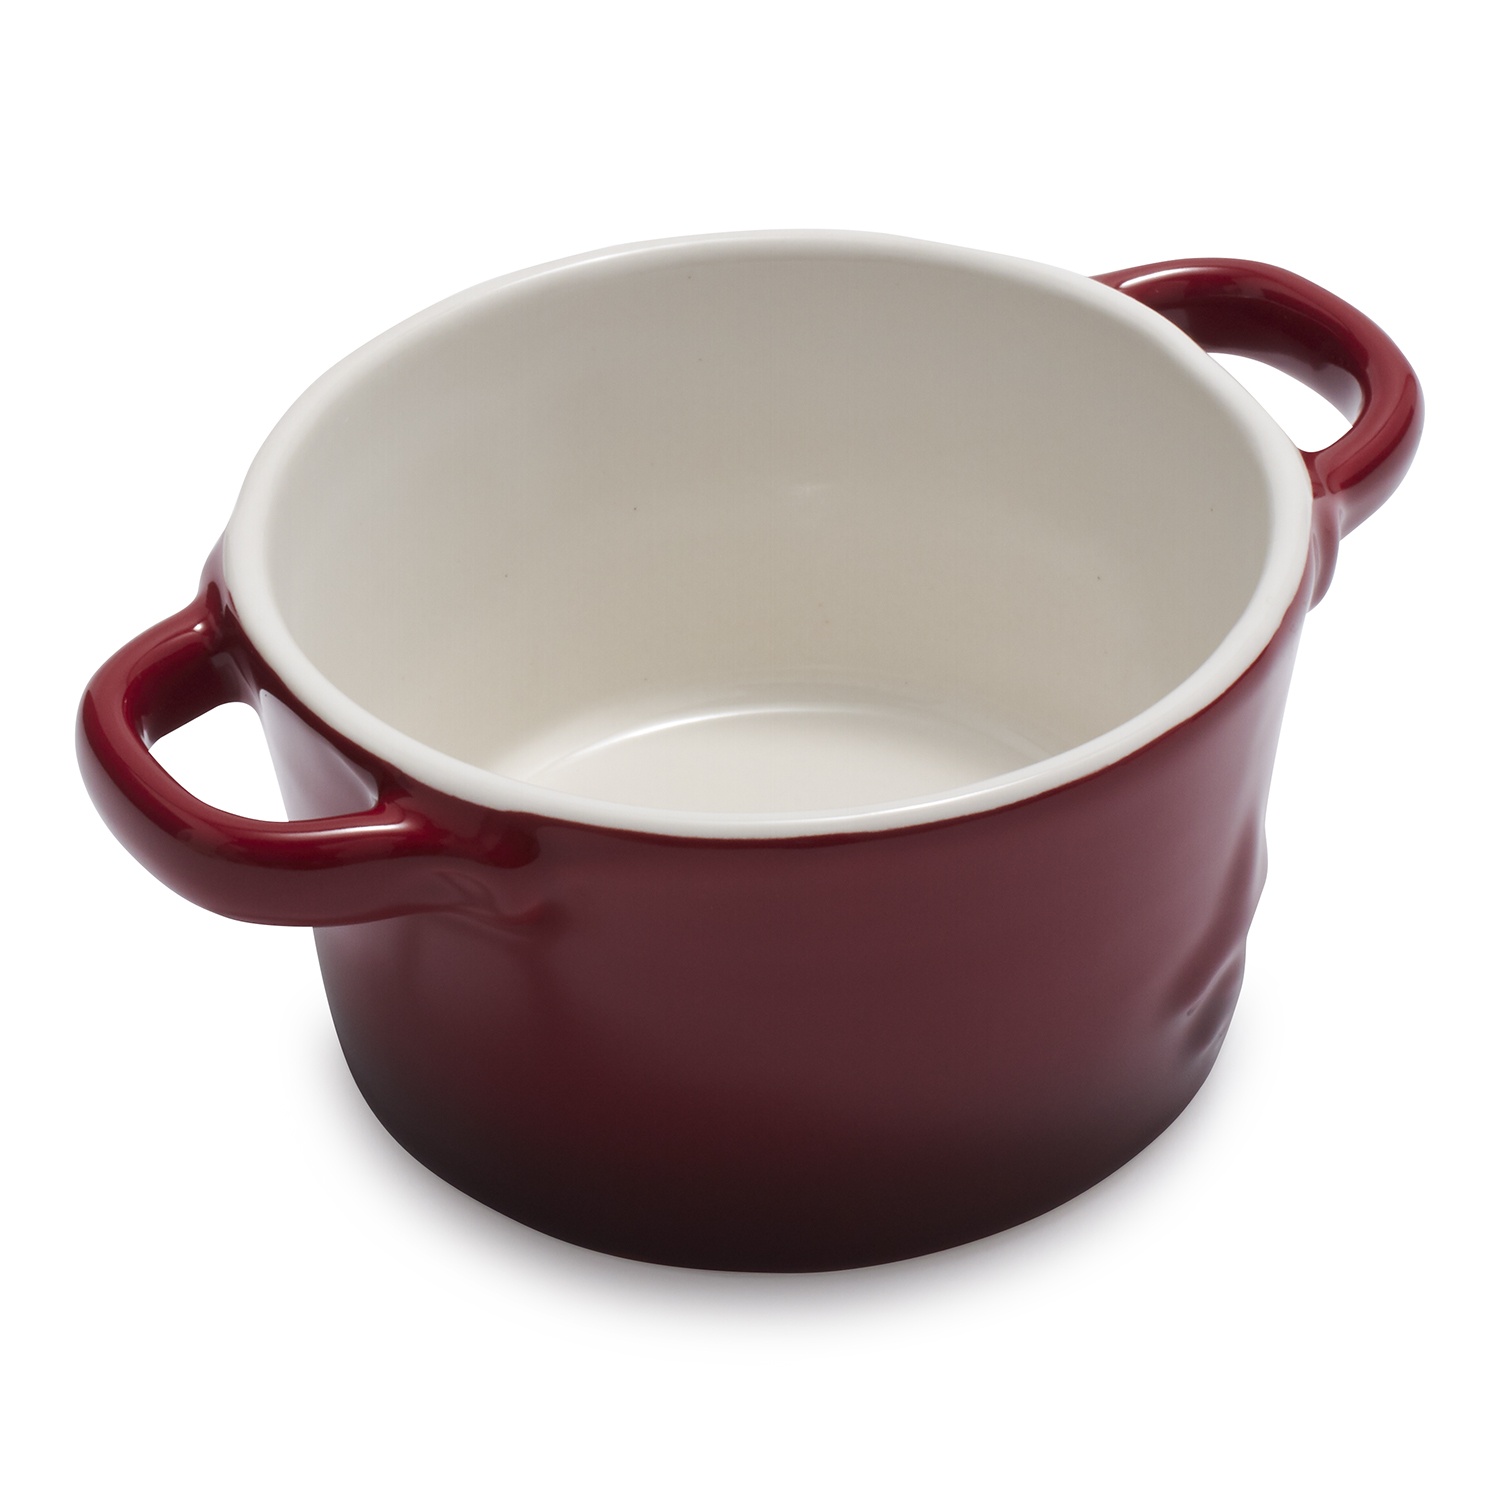 slide 1 of 1, La Marque 84 Oven to Table Round Ramekin, Red, 8 oz